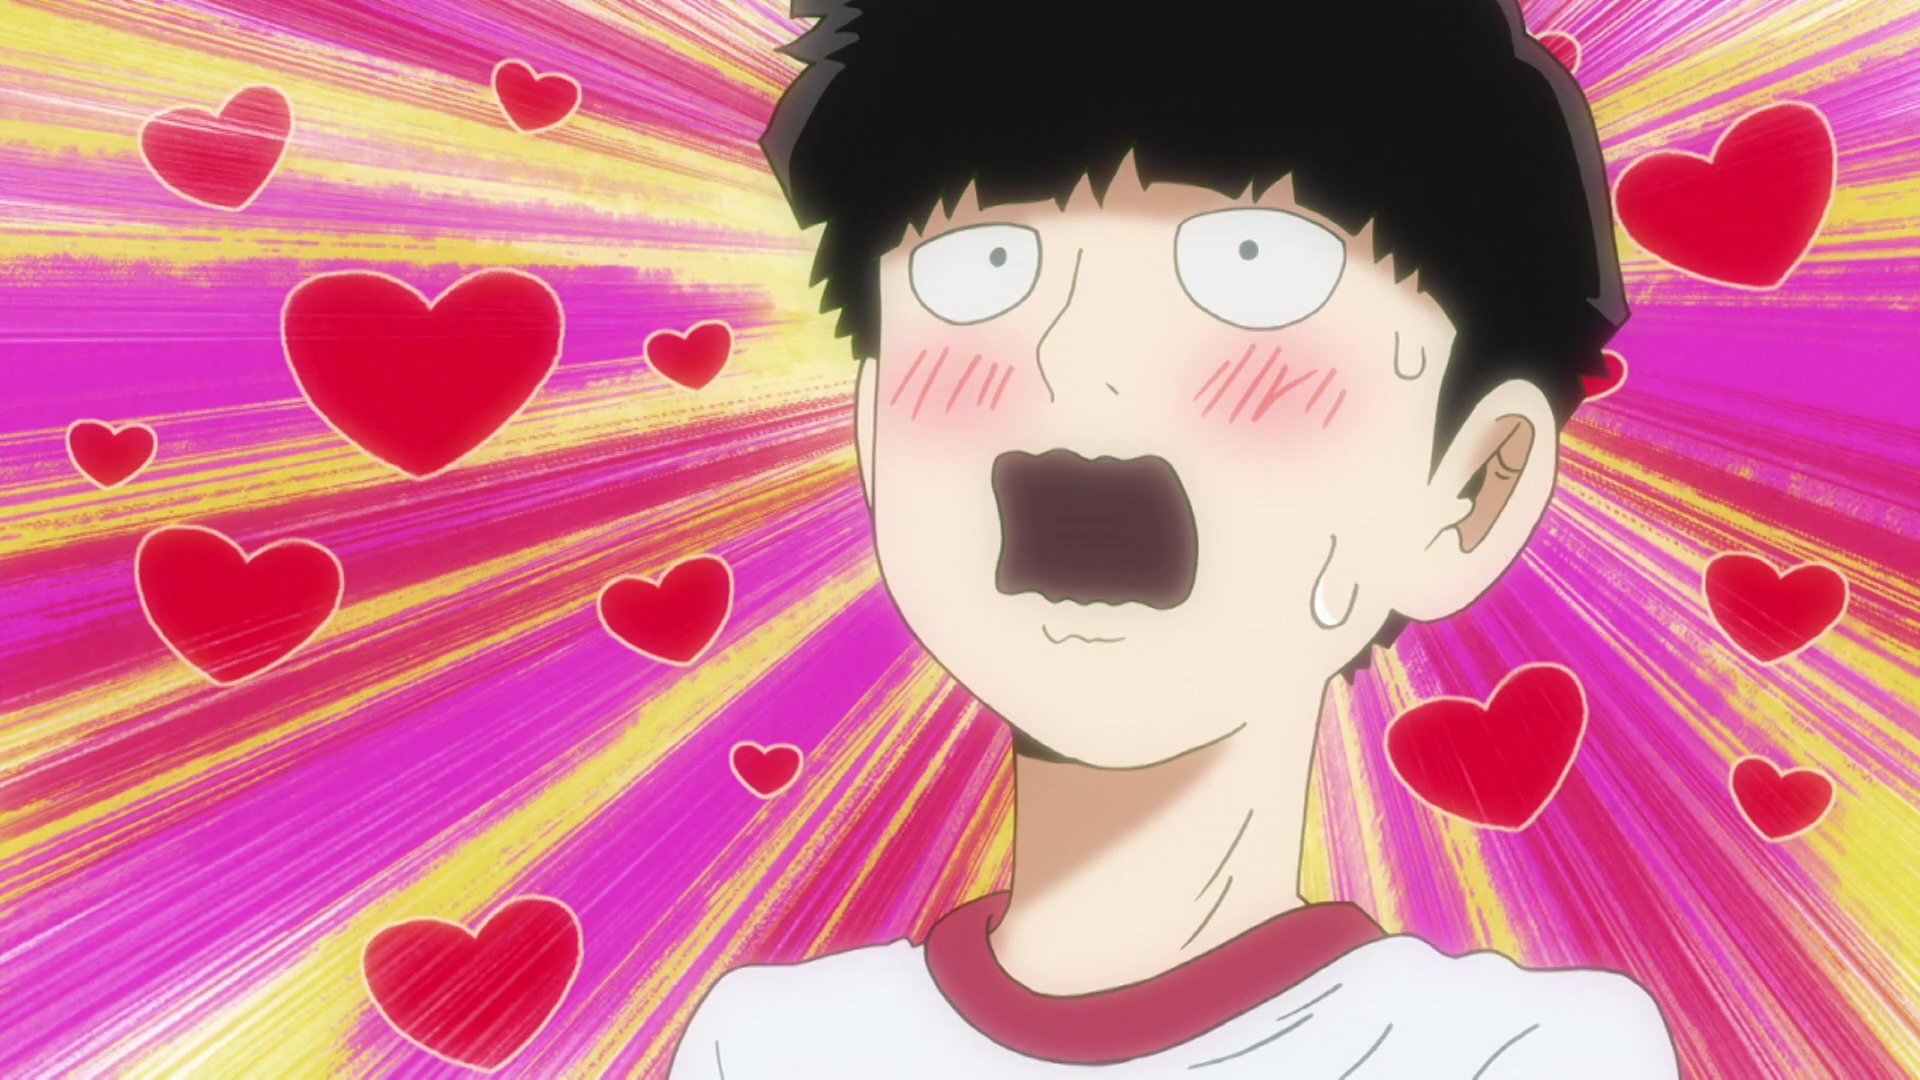 Mob Psycho 100 Season 3 Dub Moving Forward Without Mob Voice Actor